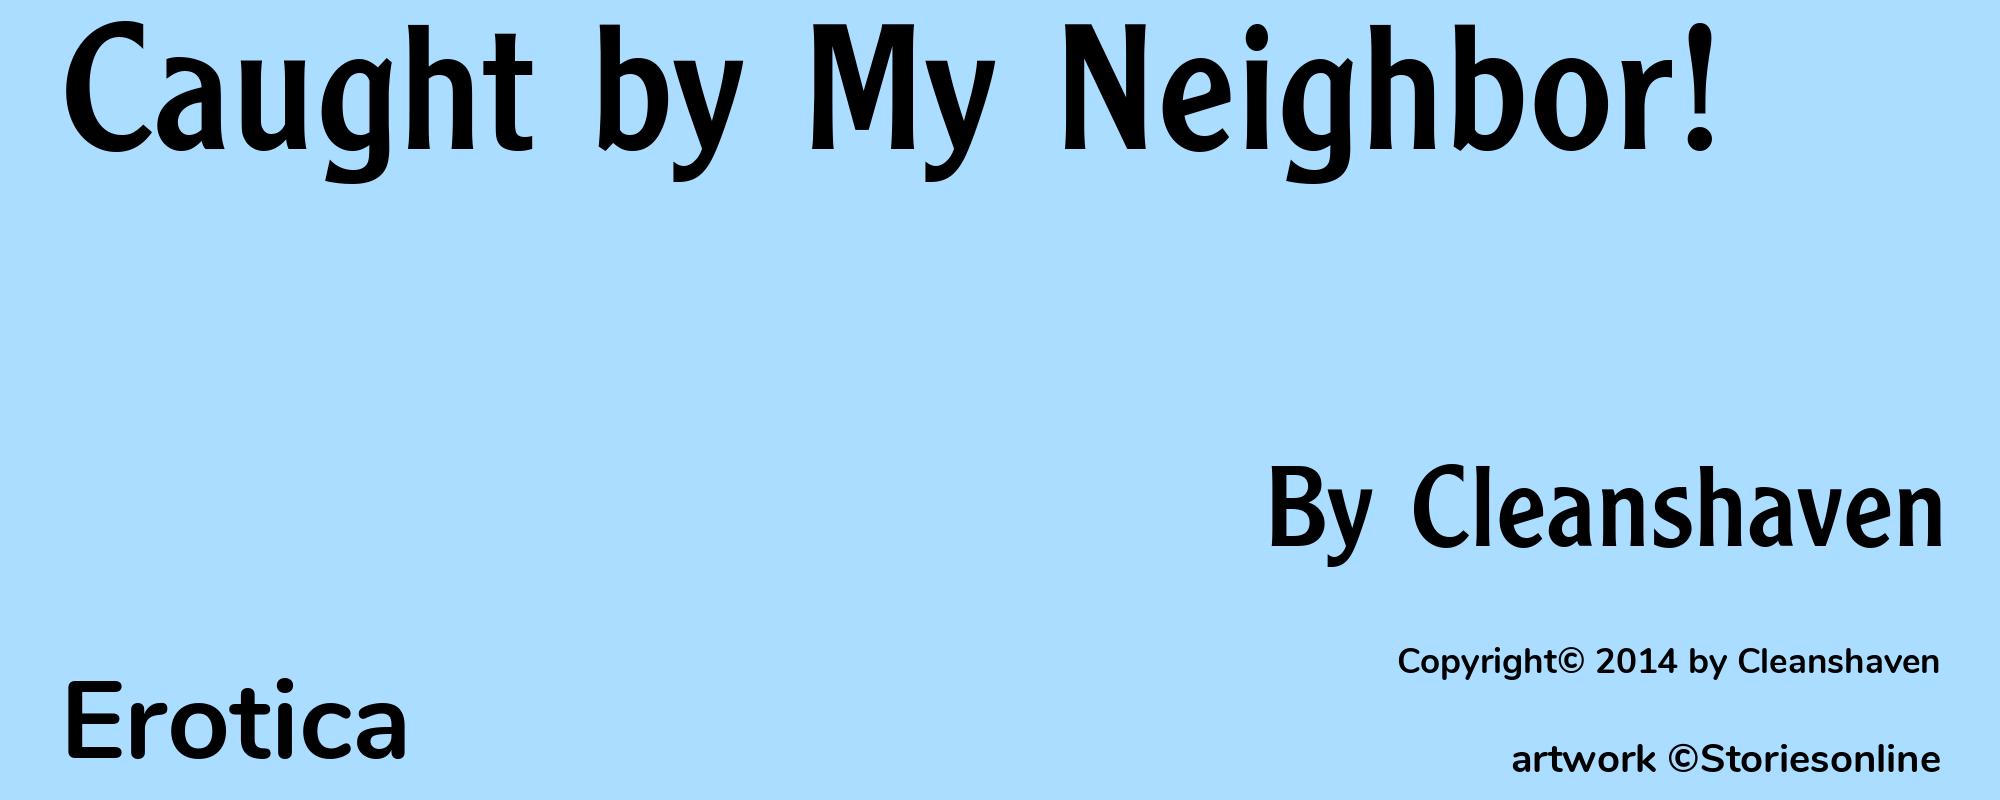 Caught by My Neighbor! - Cover